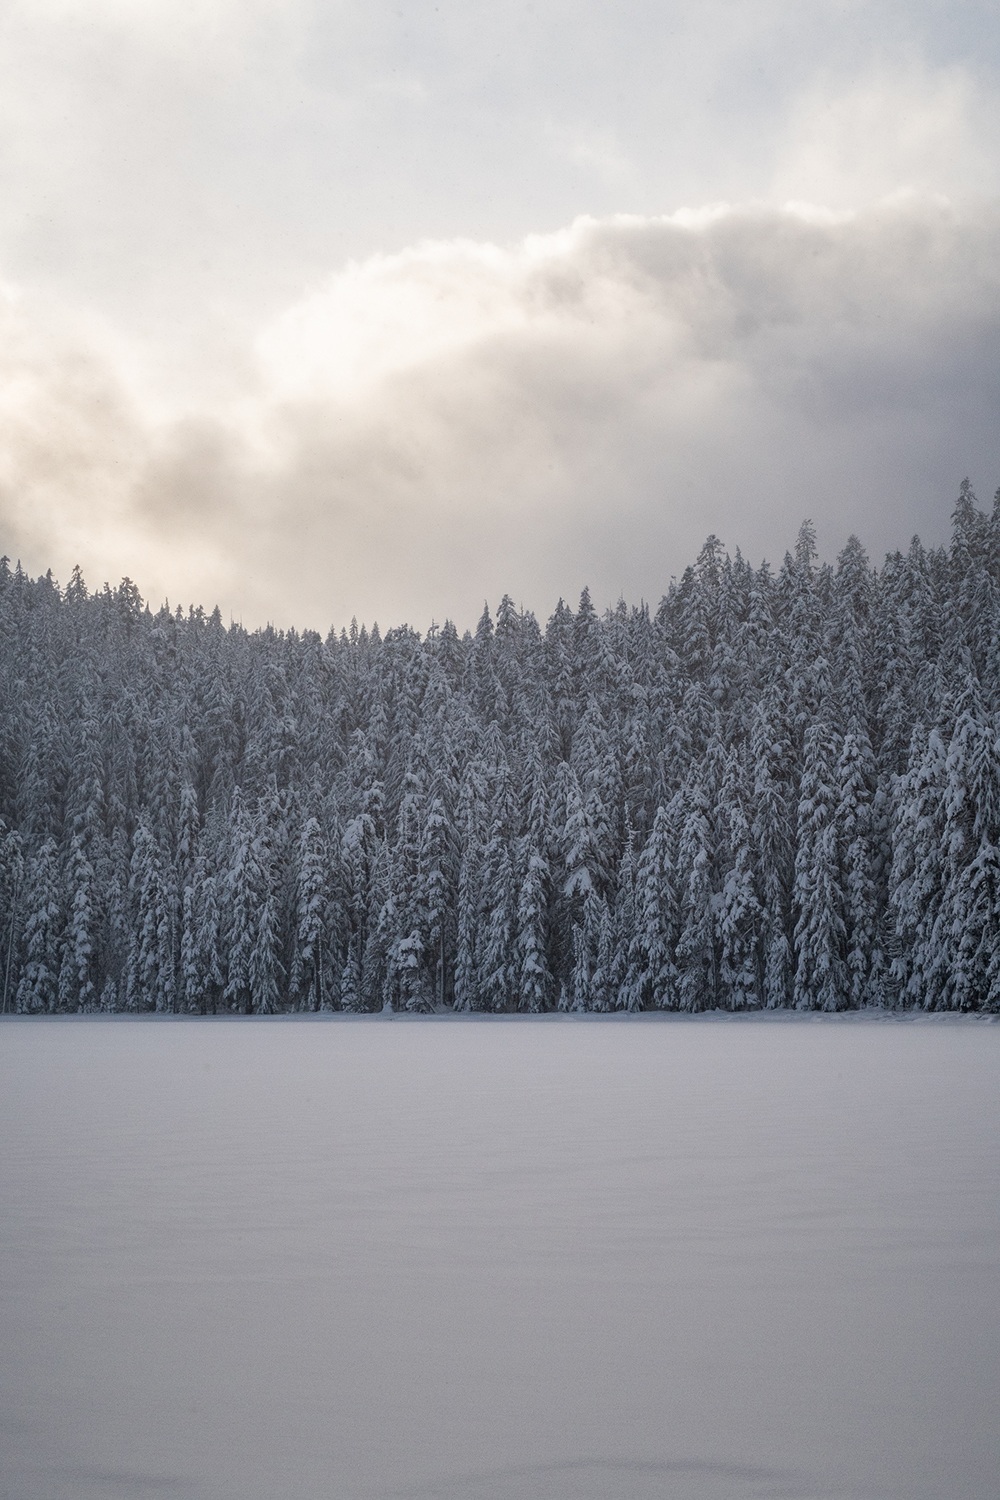 Three places to snowshoe on mt. hood this winter, lower twin lake covered in snow